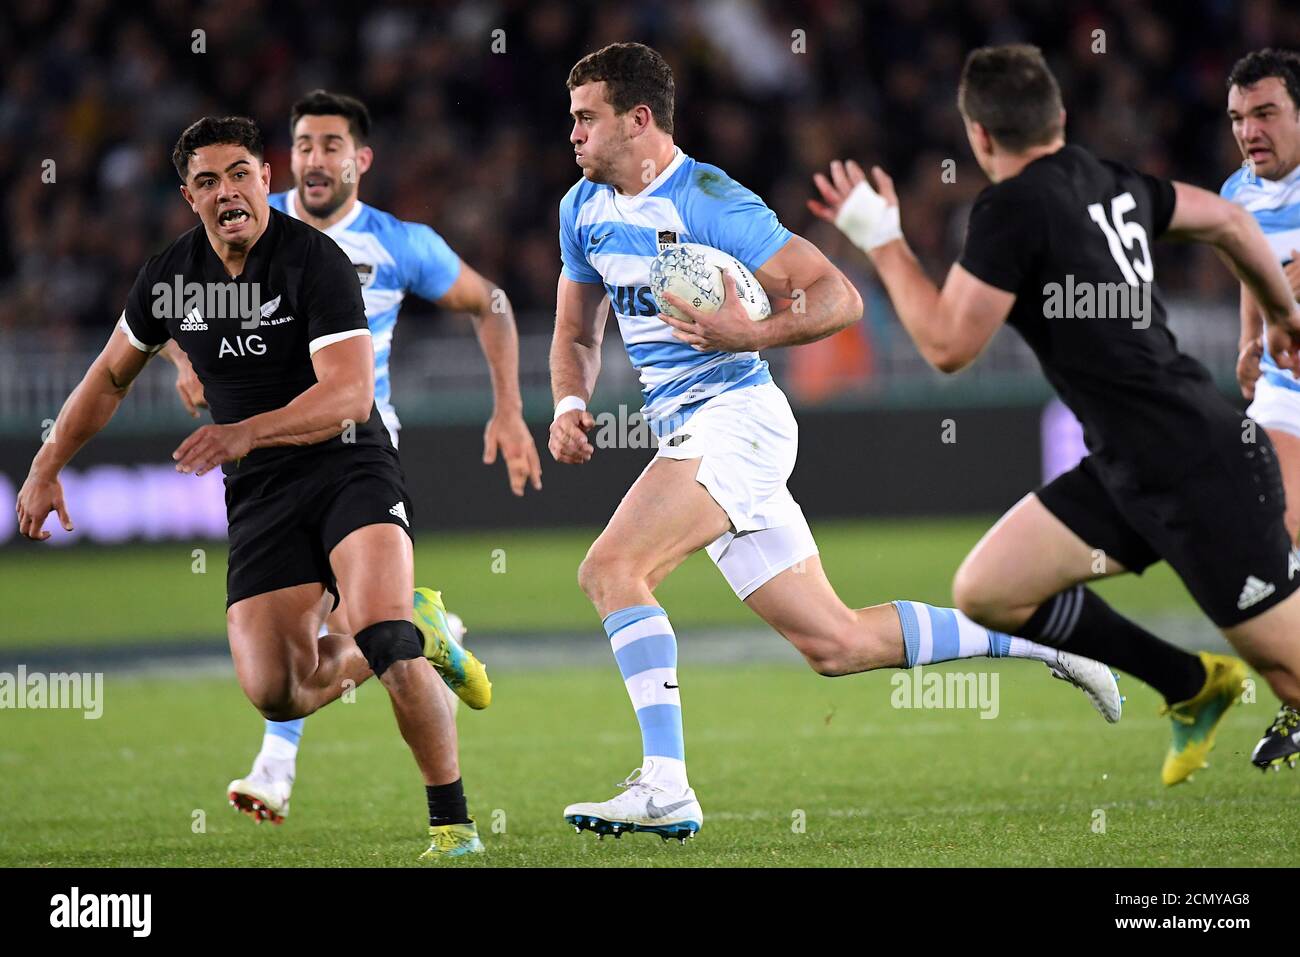 Rugby Union - Rugby Championship - New Zealand vs Argentina - Trafalgar  Park, Nelson, New Zealand - September 8, 2018 - Argentina's Emiliano  Boffelli runs with the ball. REUTERS/Ross Setford Stock Photo - Alamy